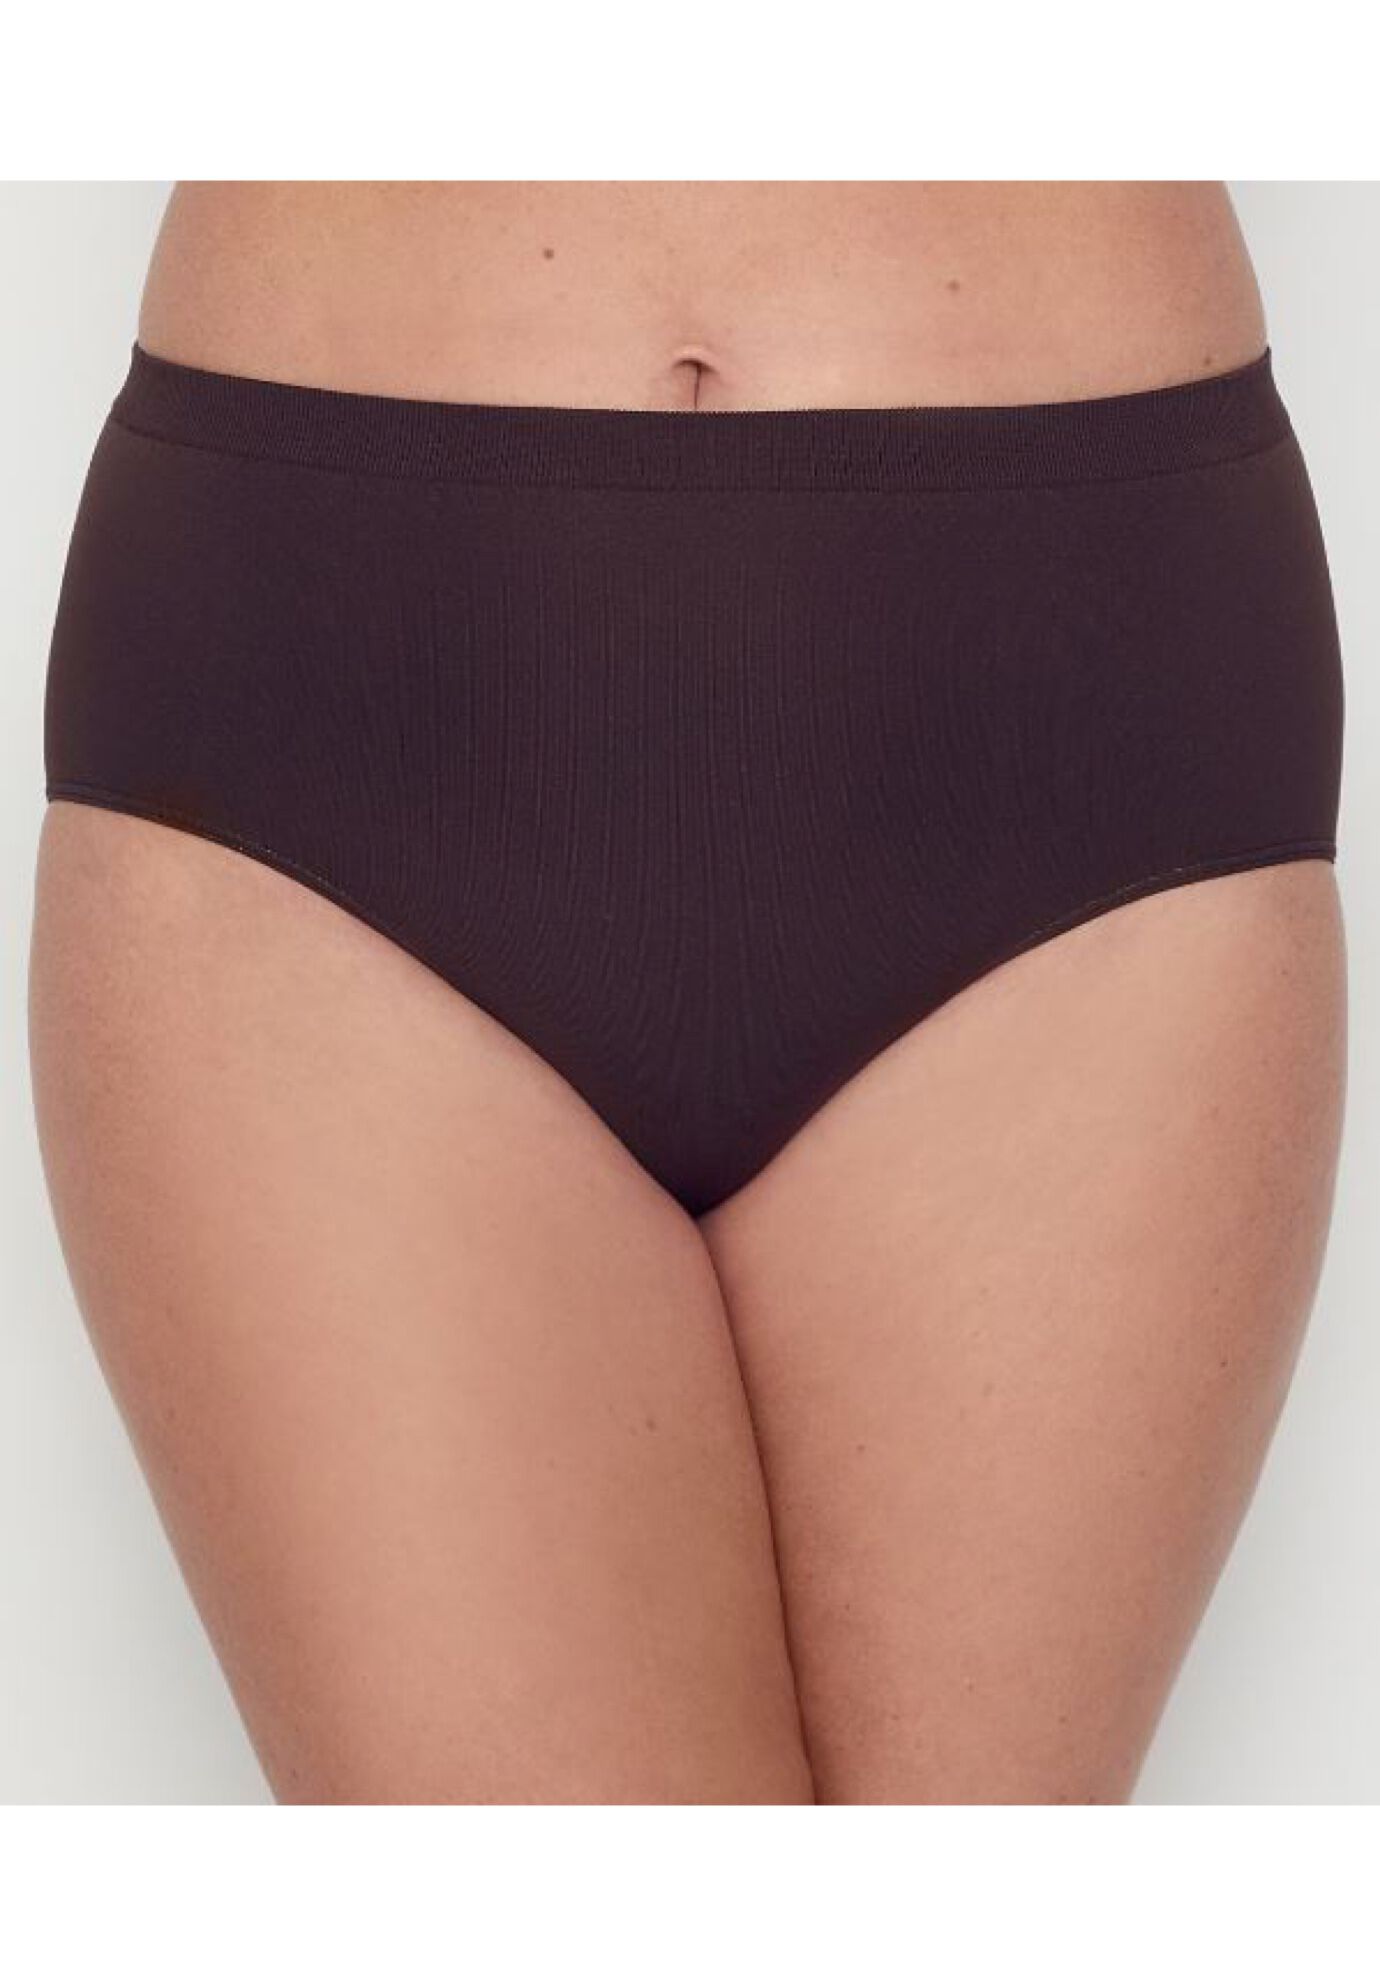 Plus Size Women's Comfort Revolution EasyLite&#8482; Brief by Bali in Warm Cocoa Brown (Size 8)